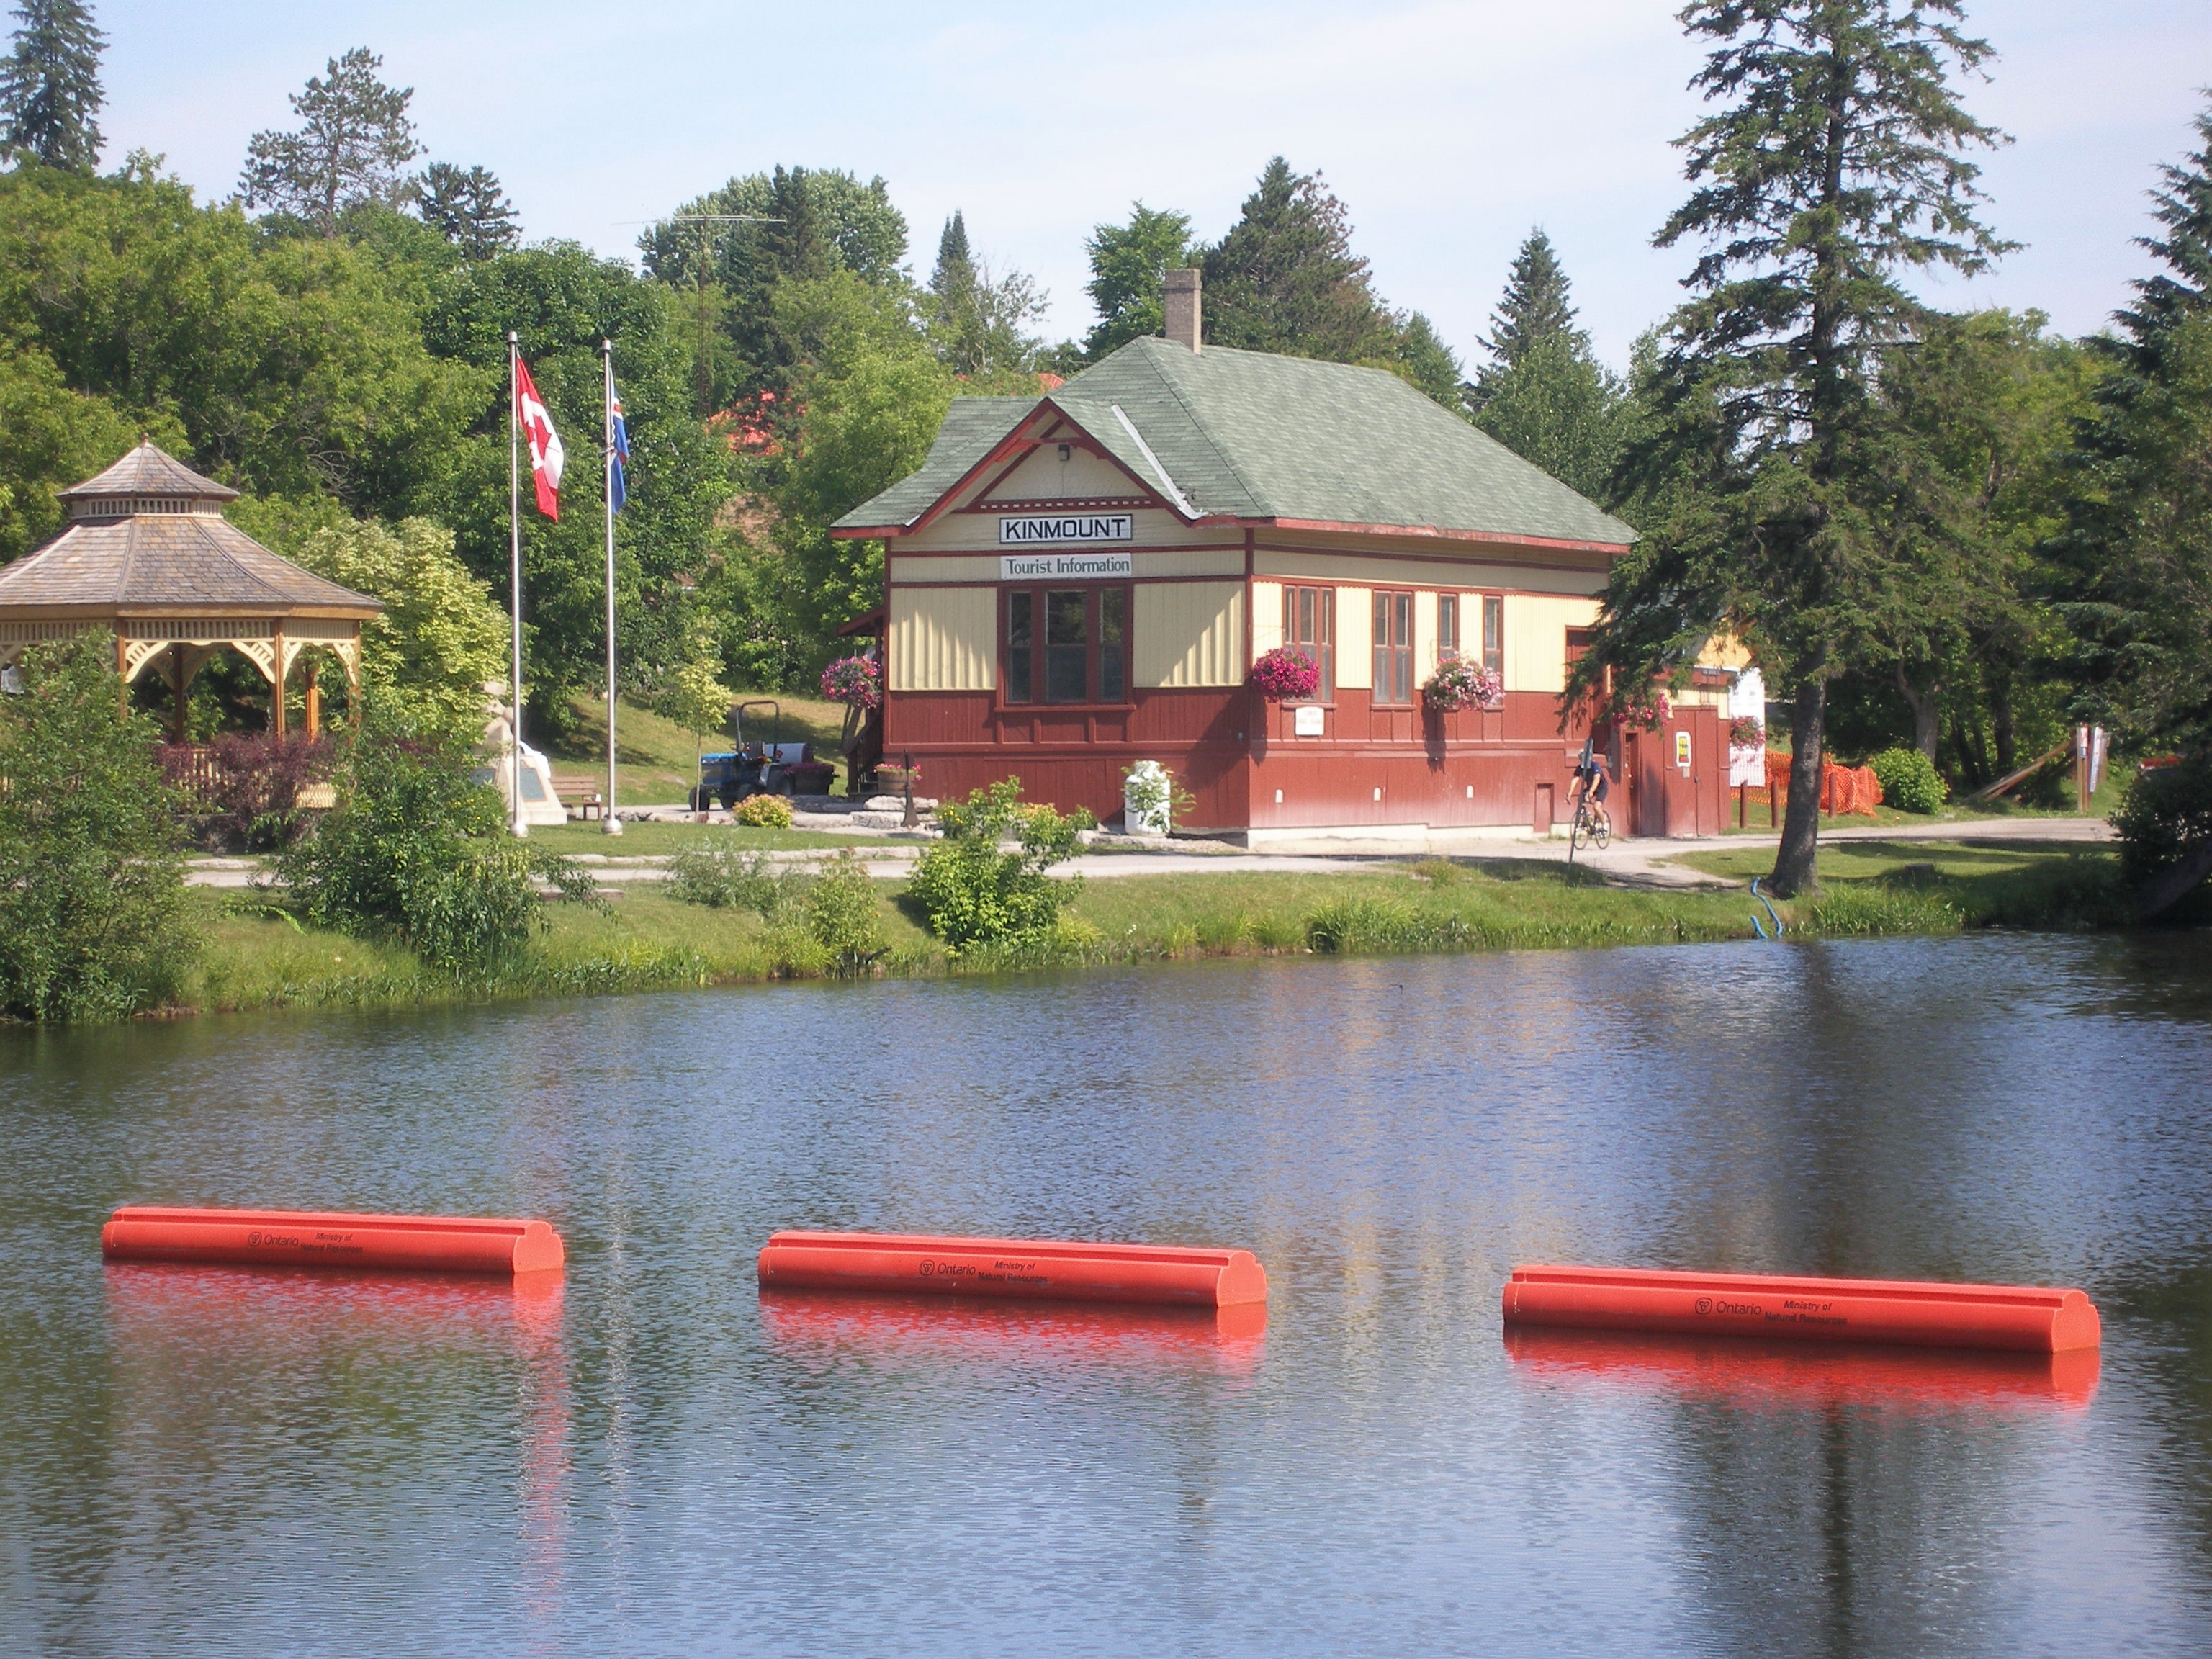 Small railway station with brightly-coloured exterior in a forested area alongside a river. 